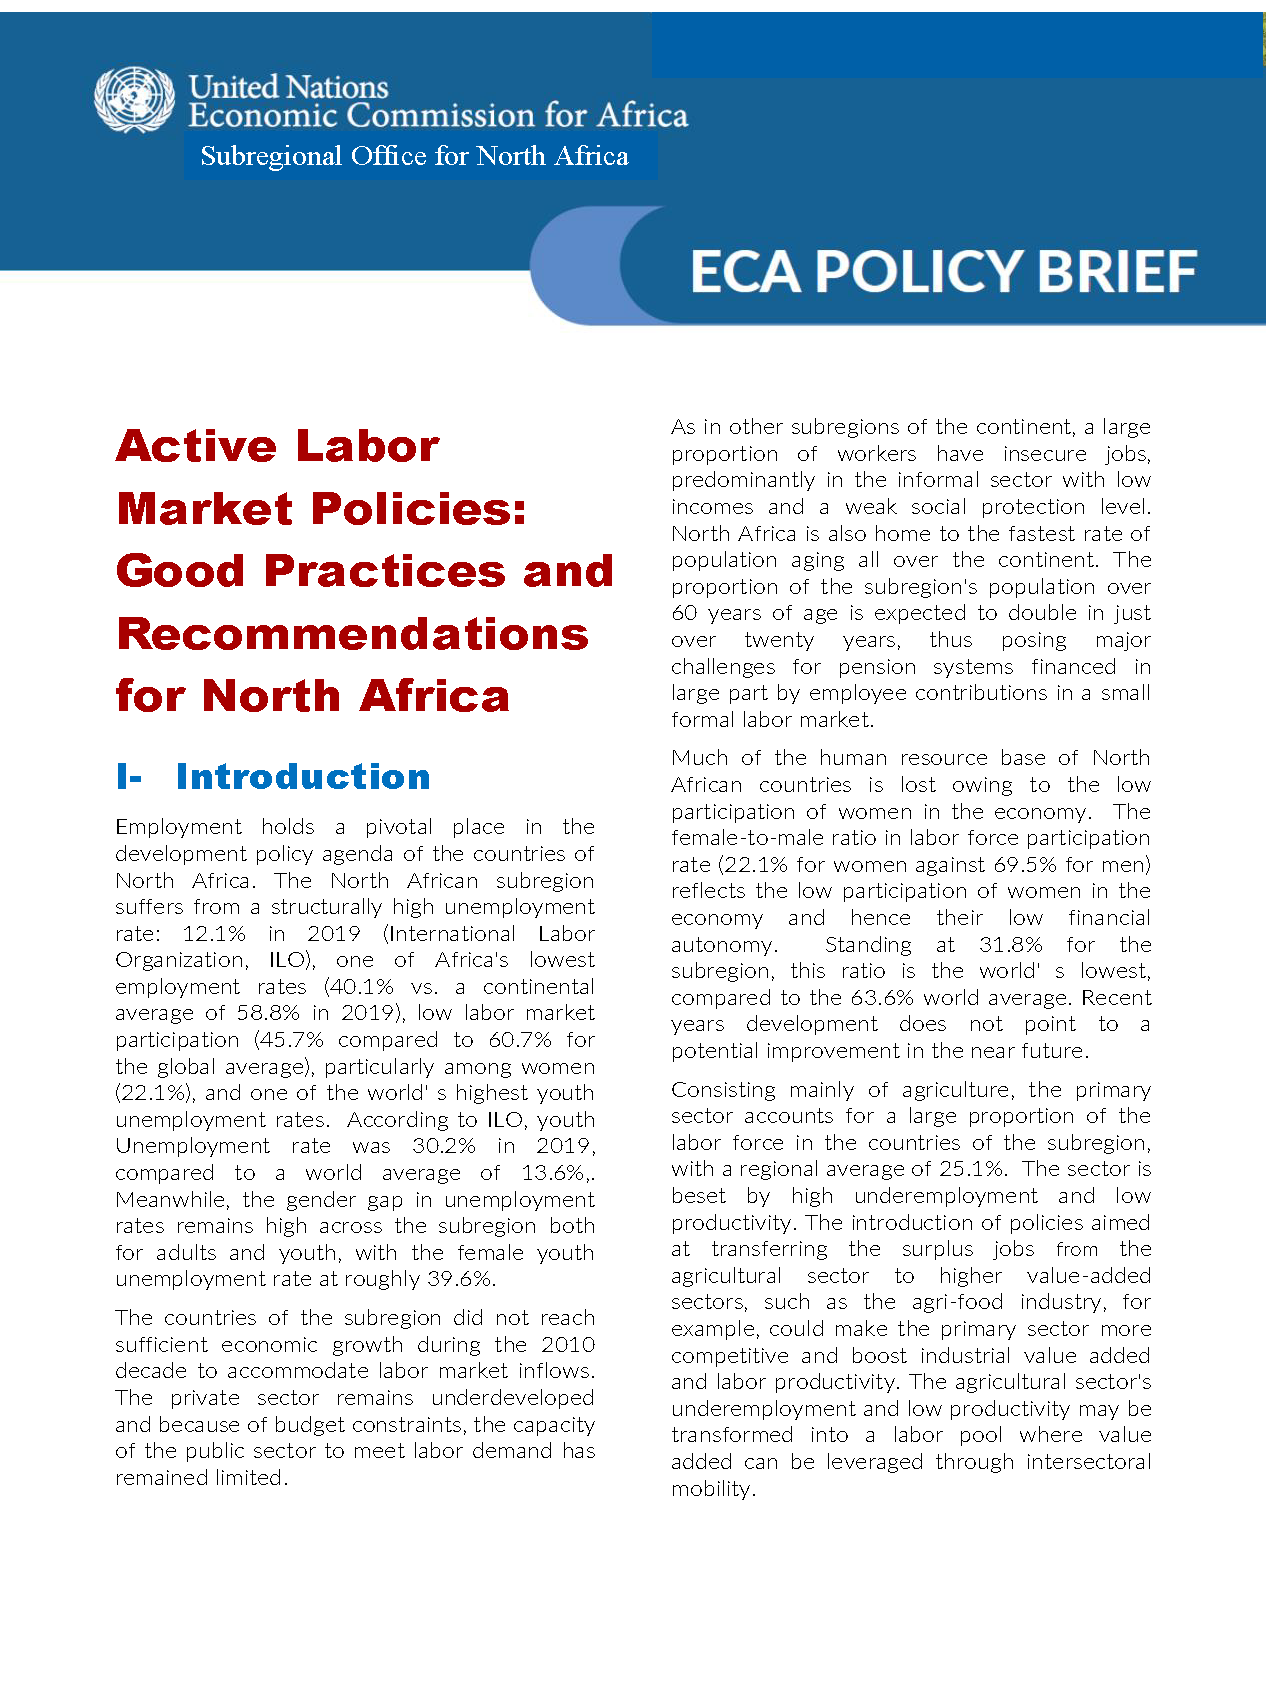 Policy Brief - Active Labor Market Policies Good Practices and Recommendations for North Africa